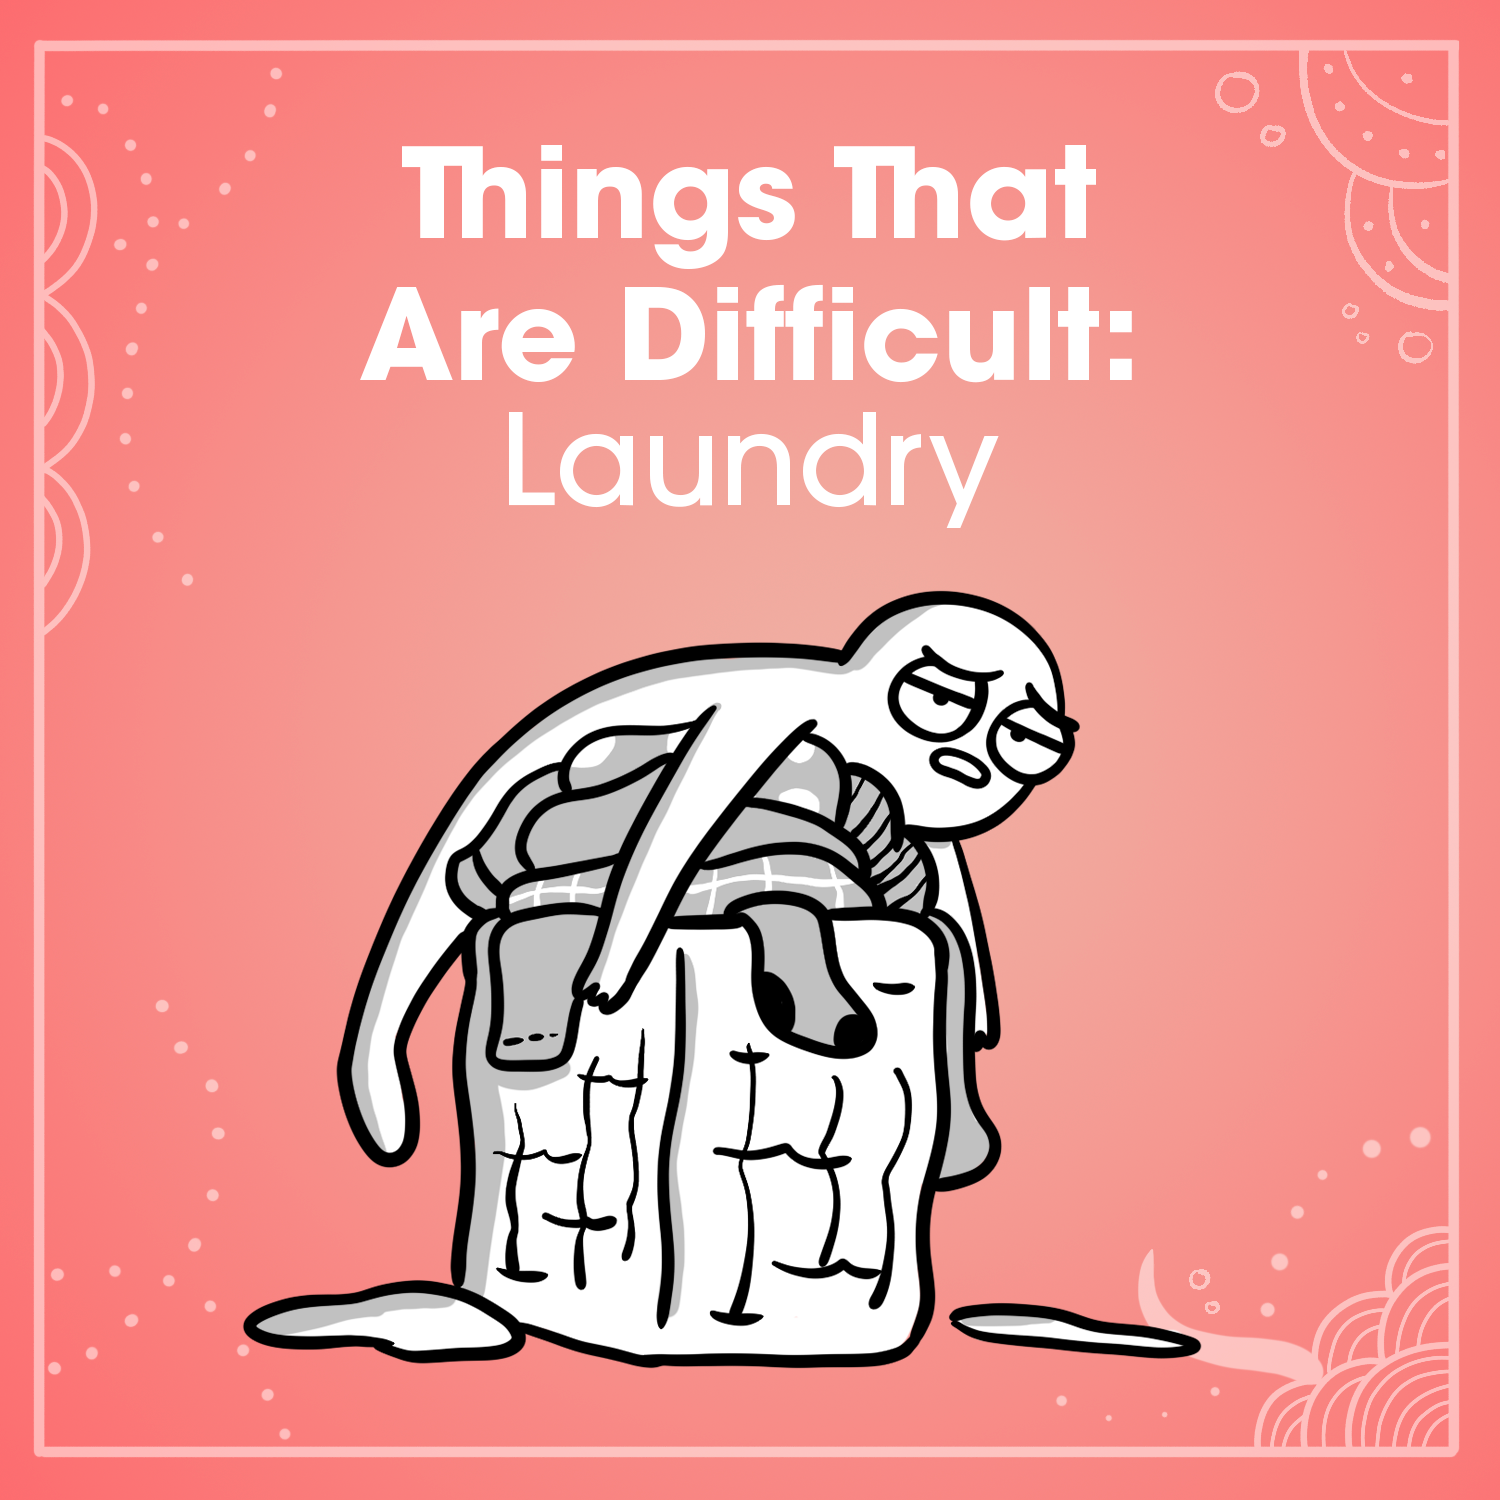 Things That Are Difficult: Laundry